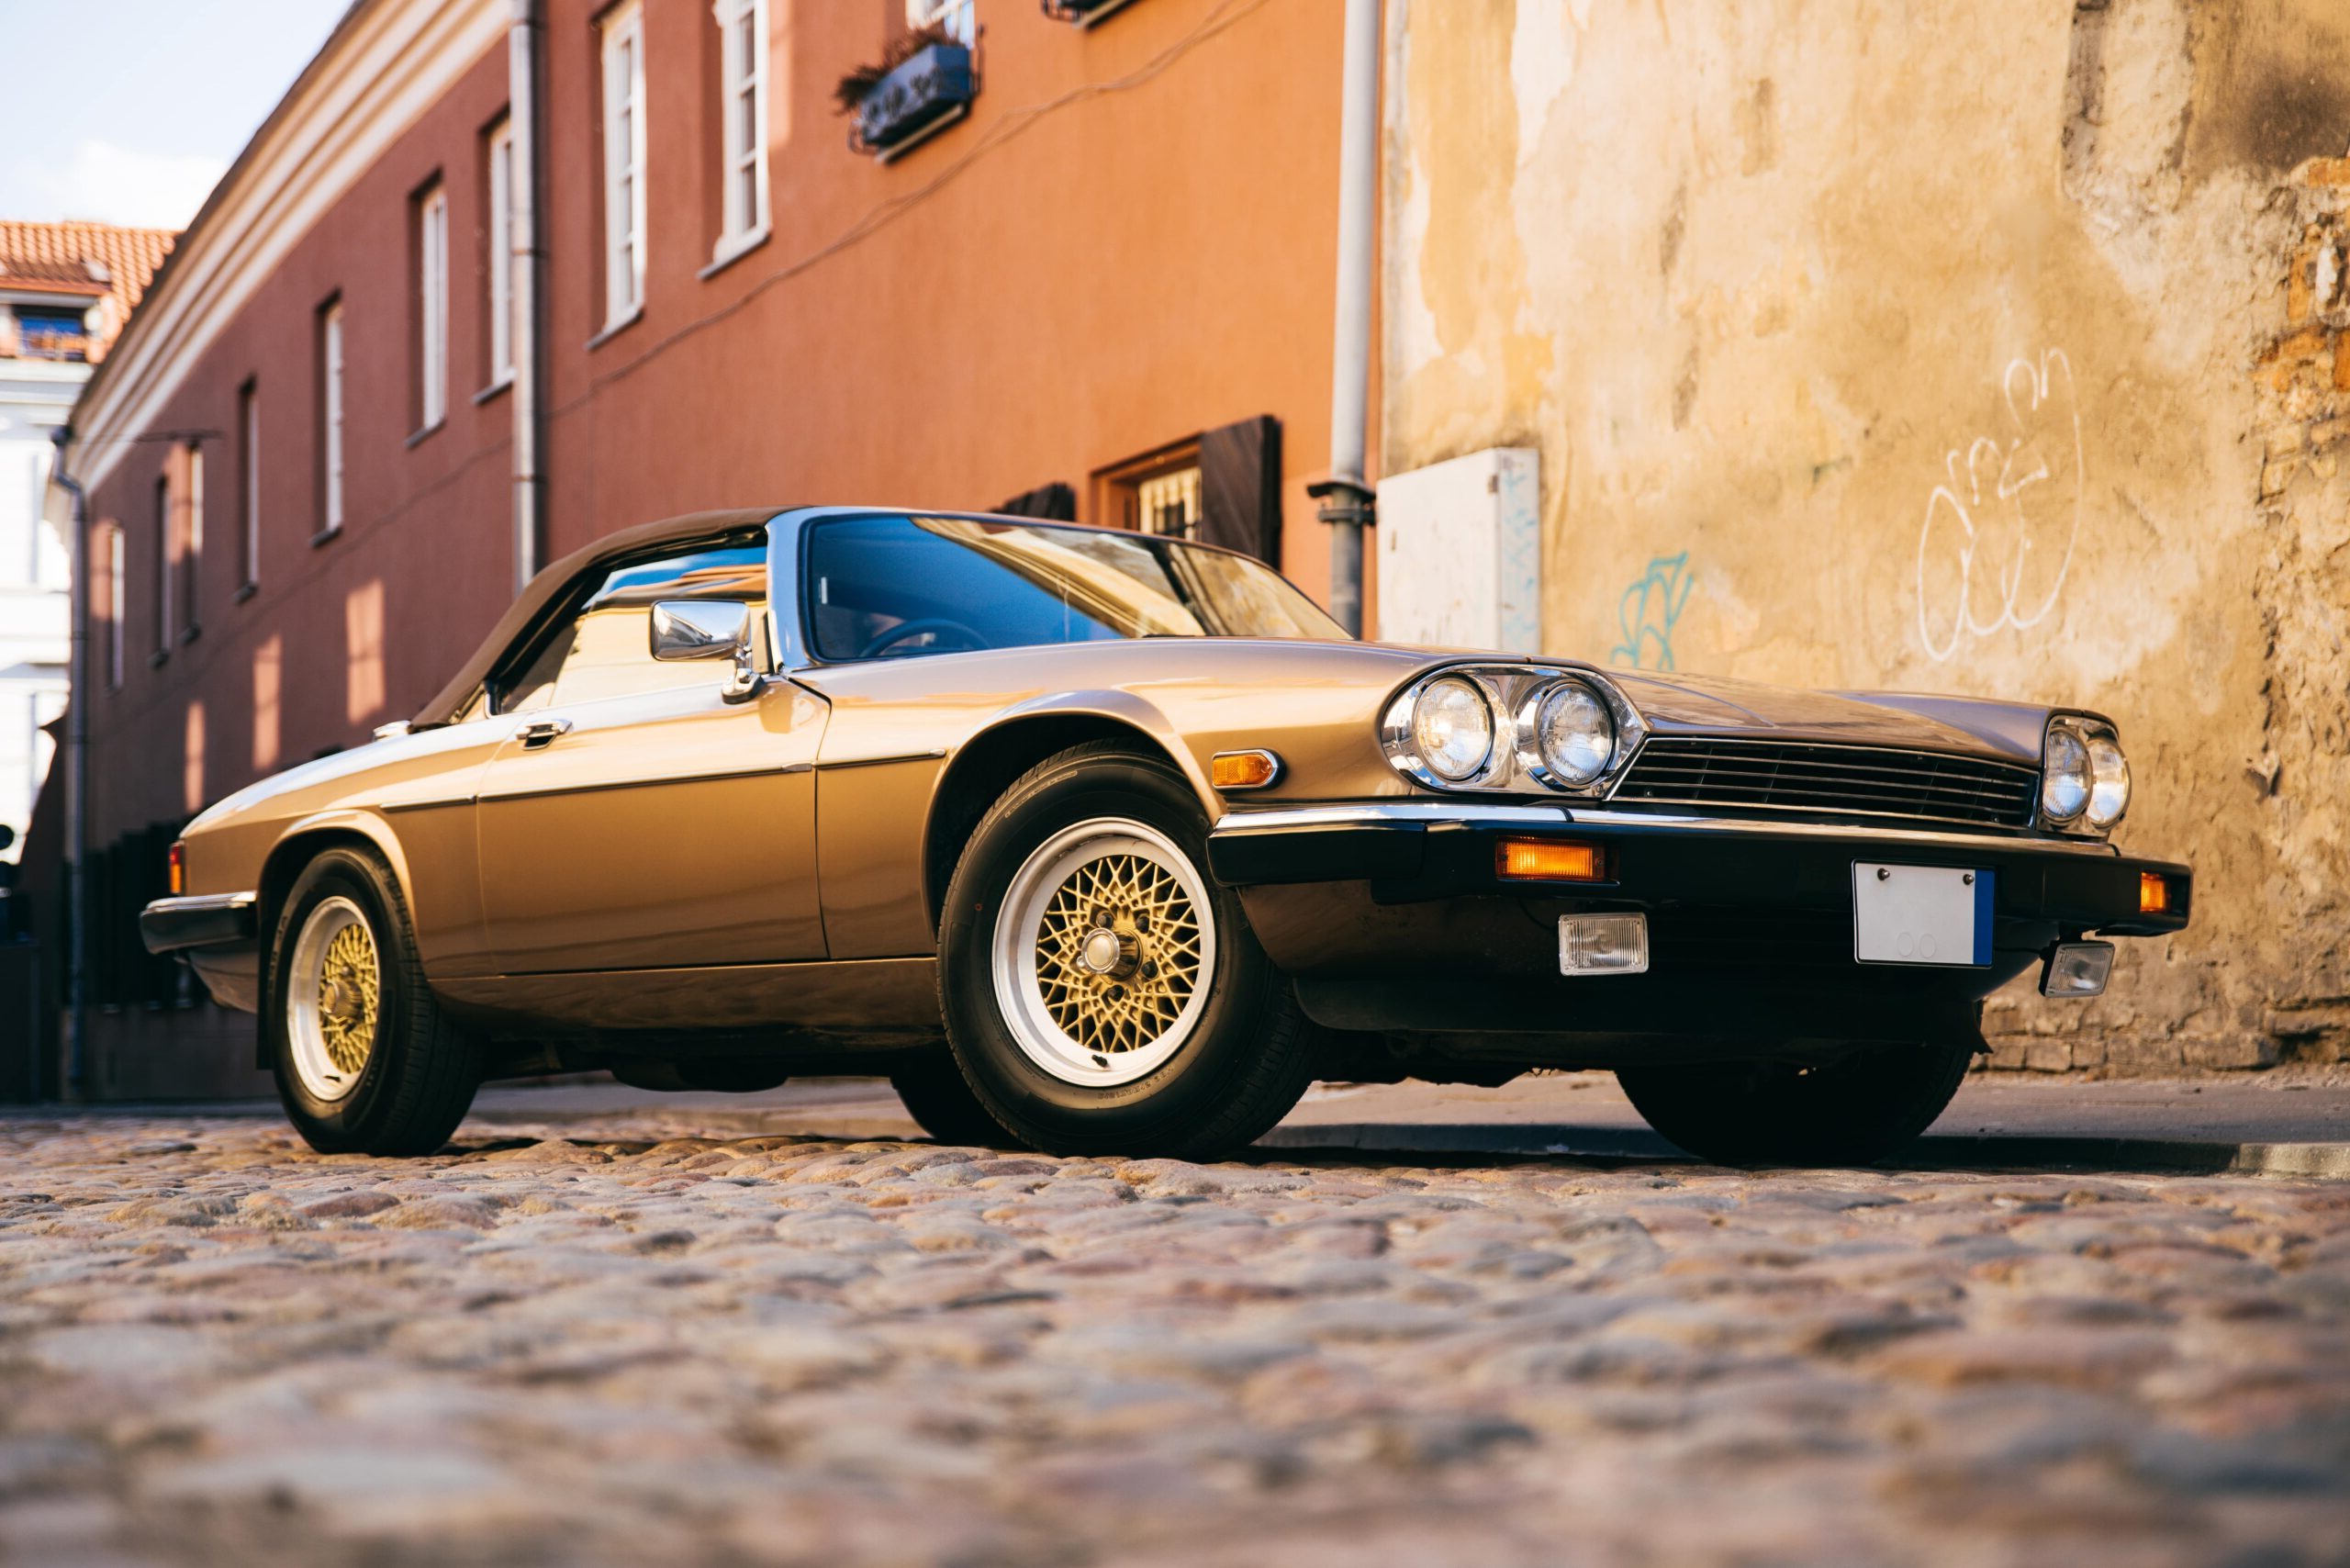 Top 3 Places To Buy a Classic Vehicle in The UK